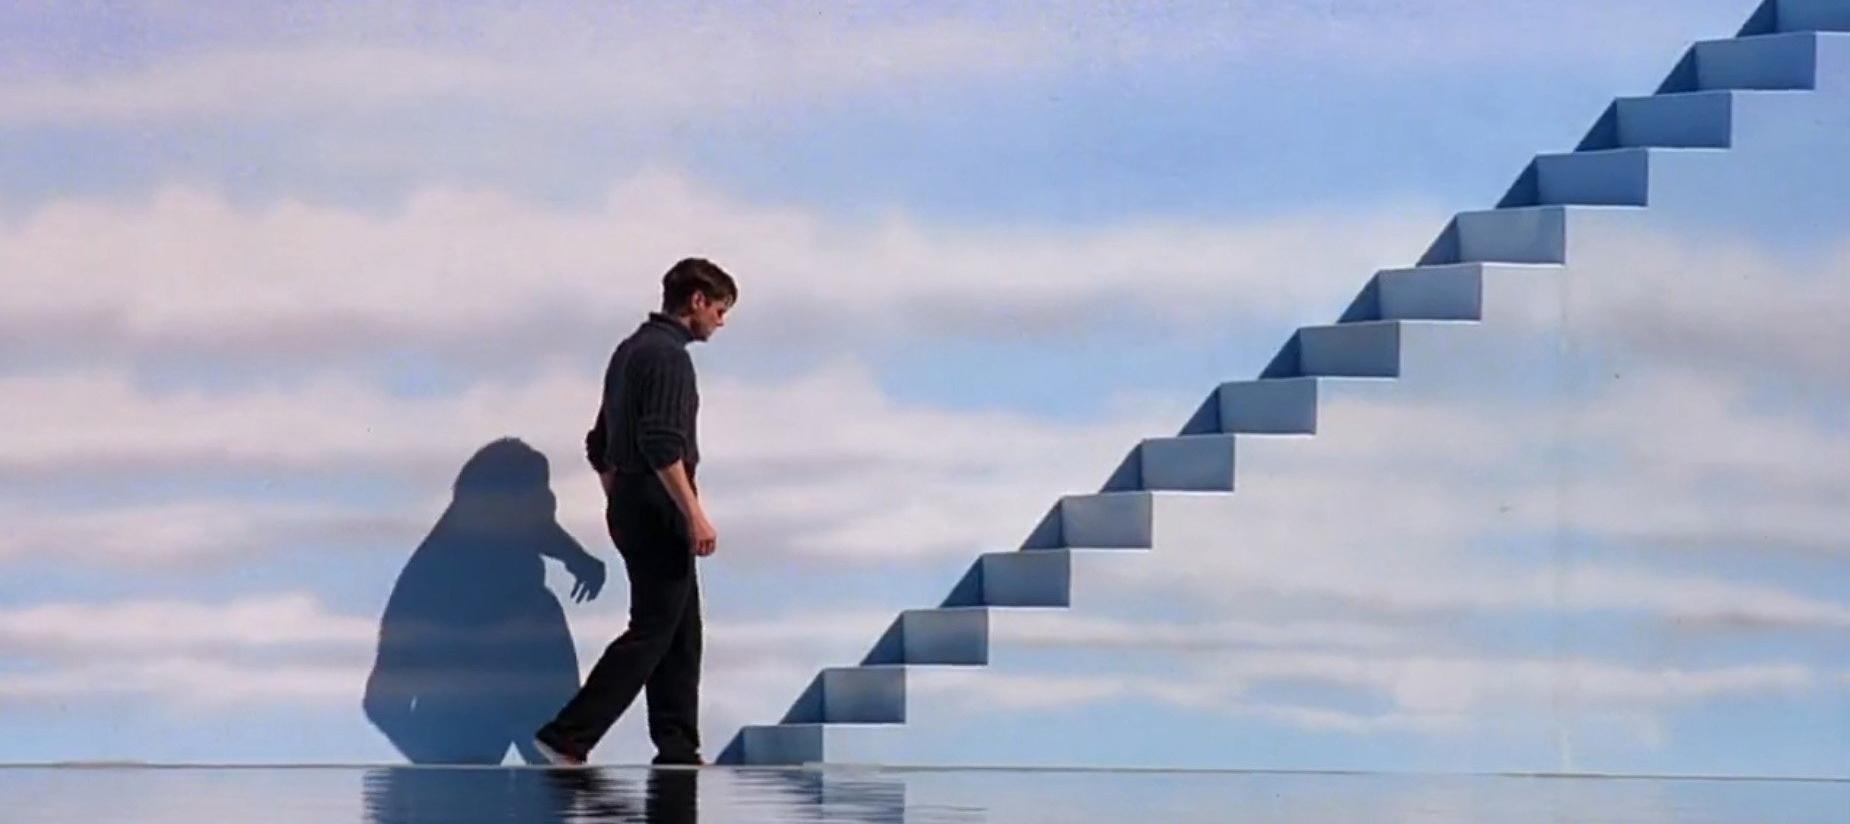 THE TRUMAN SHOW Opens...